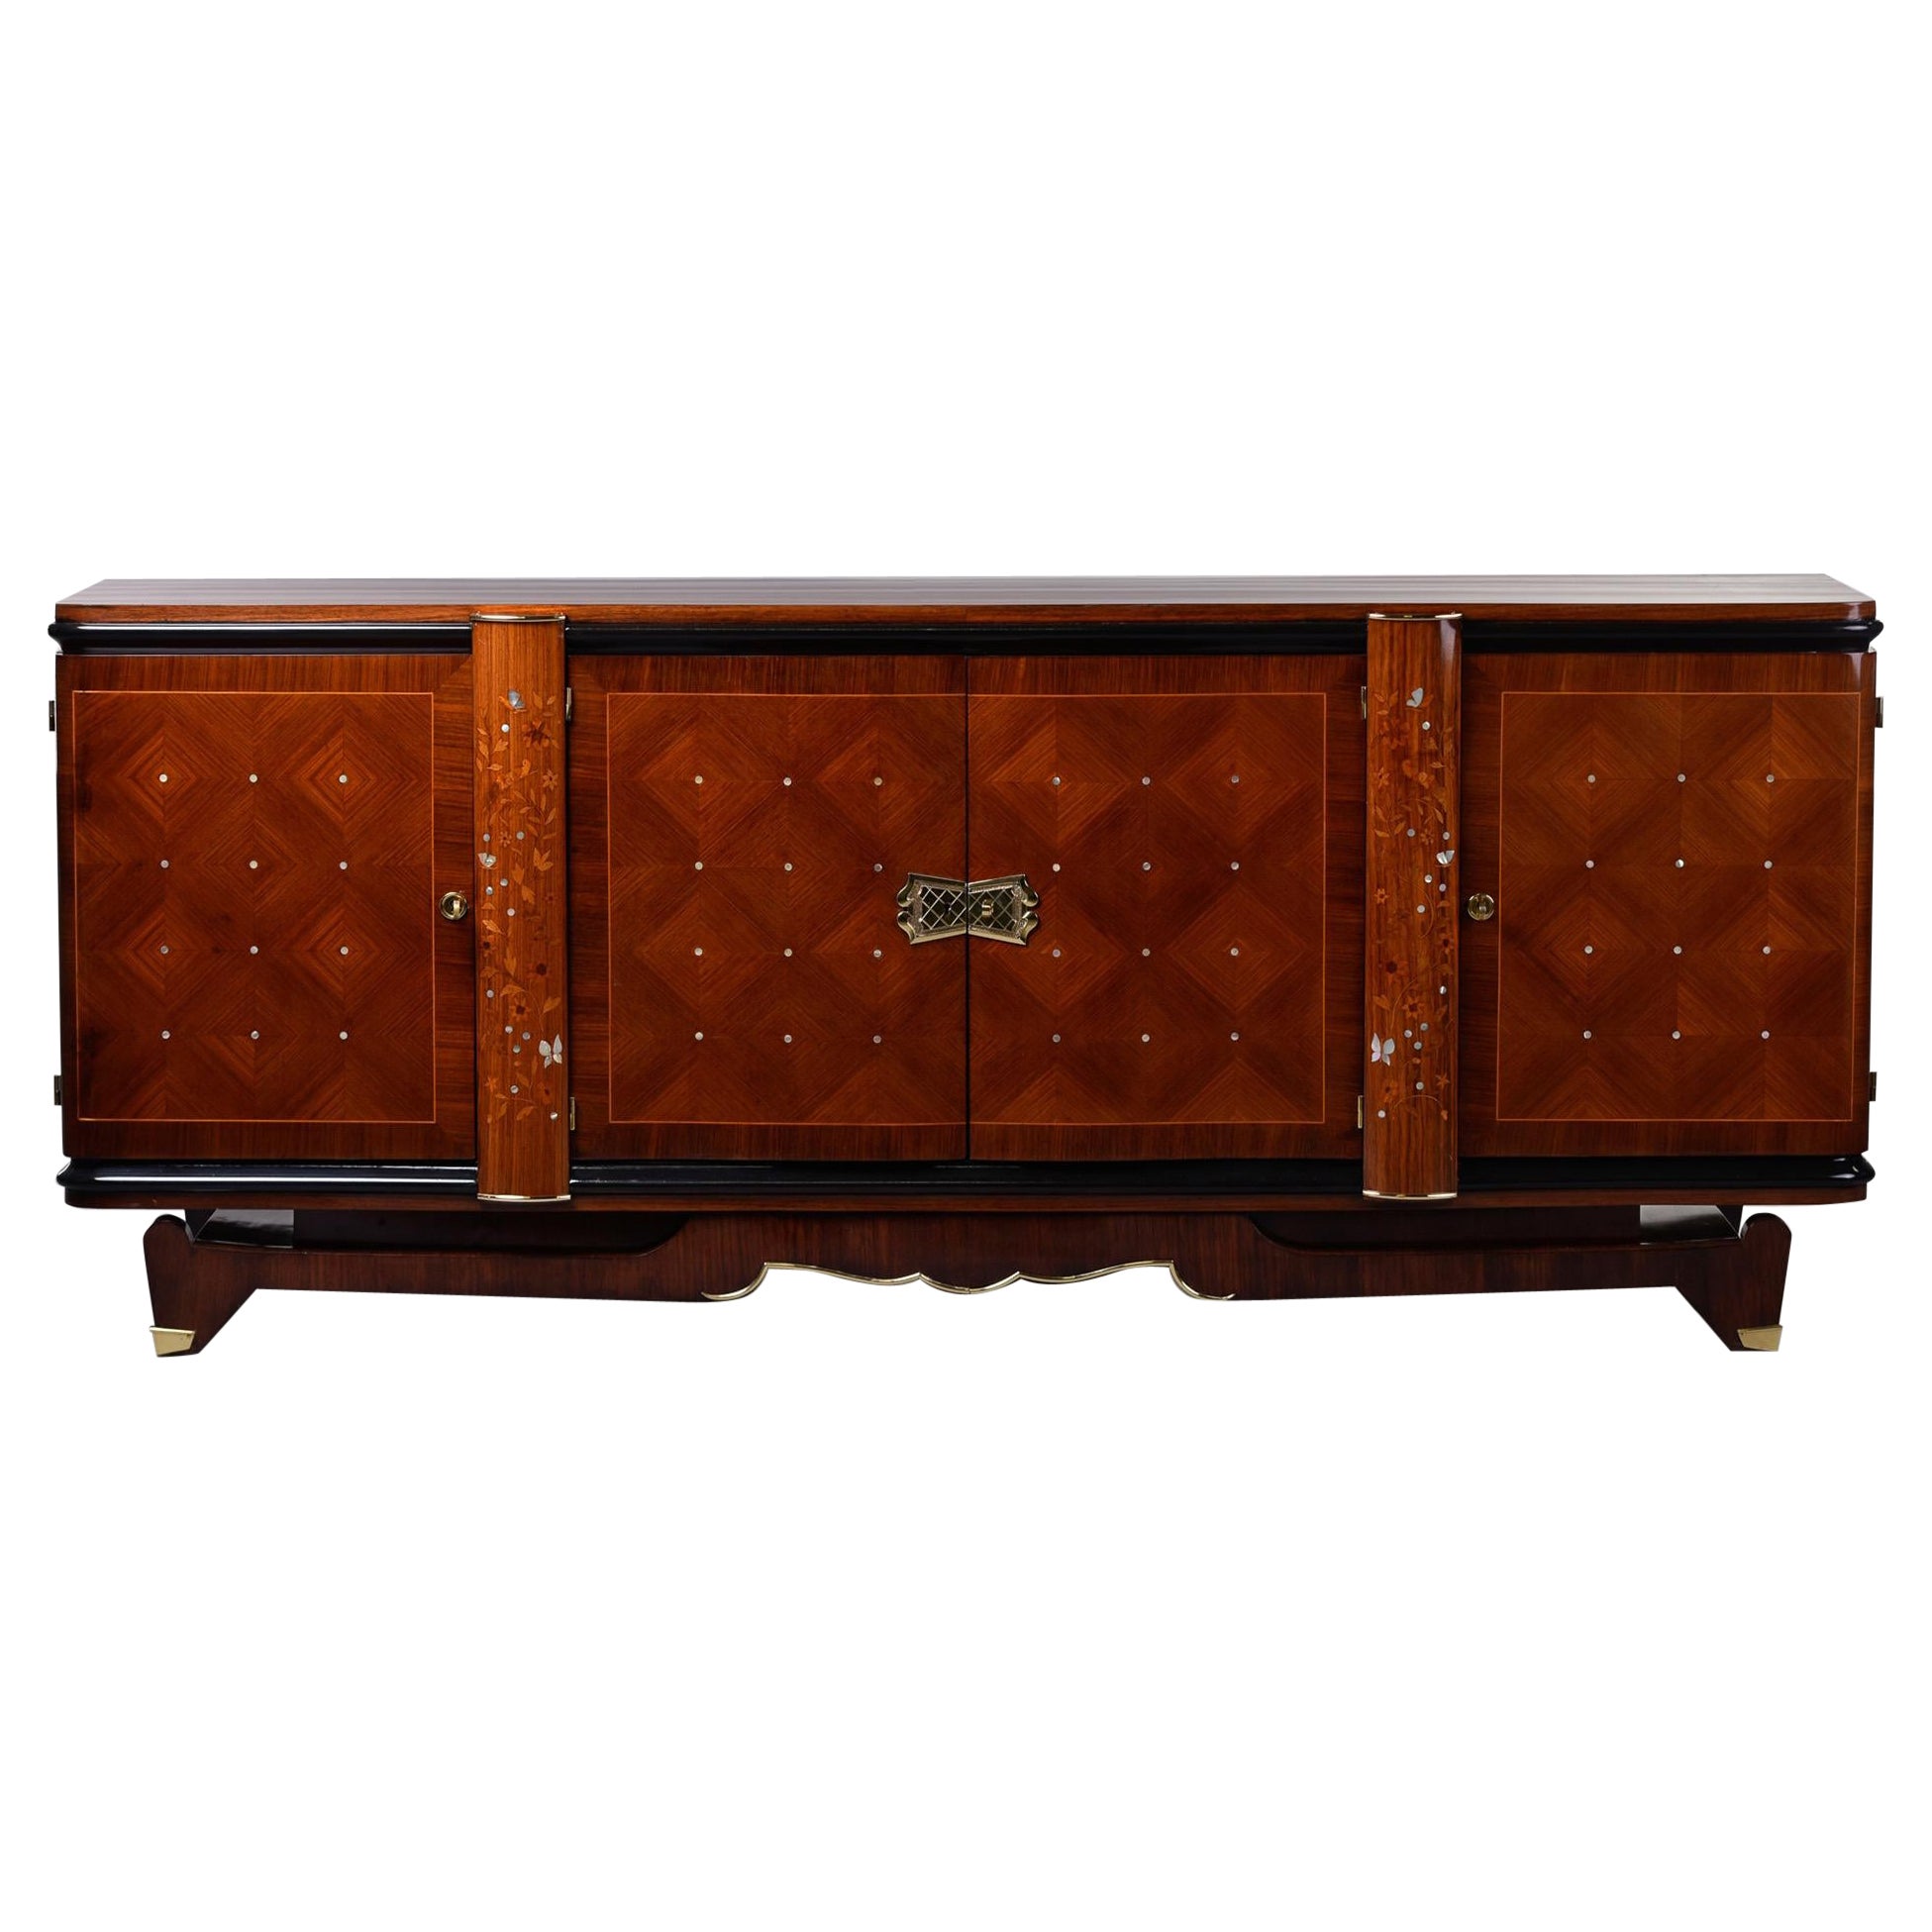 French Art Deco Palisandre Sideboard or Buffet with Mother of Pearl Inlay